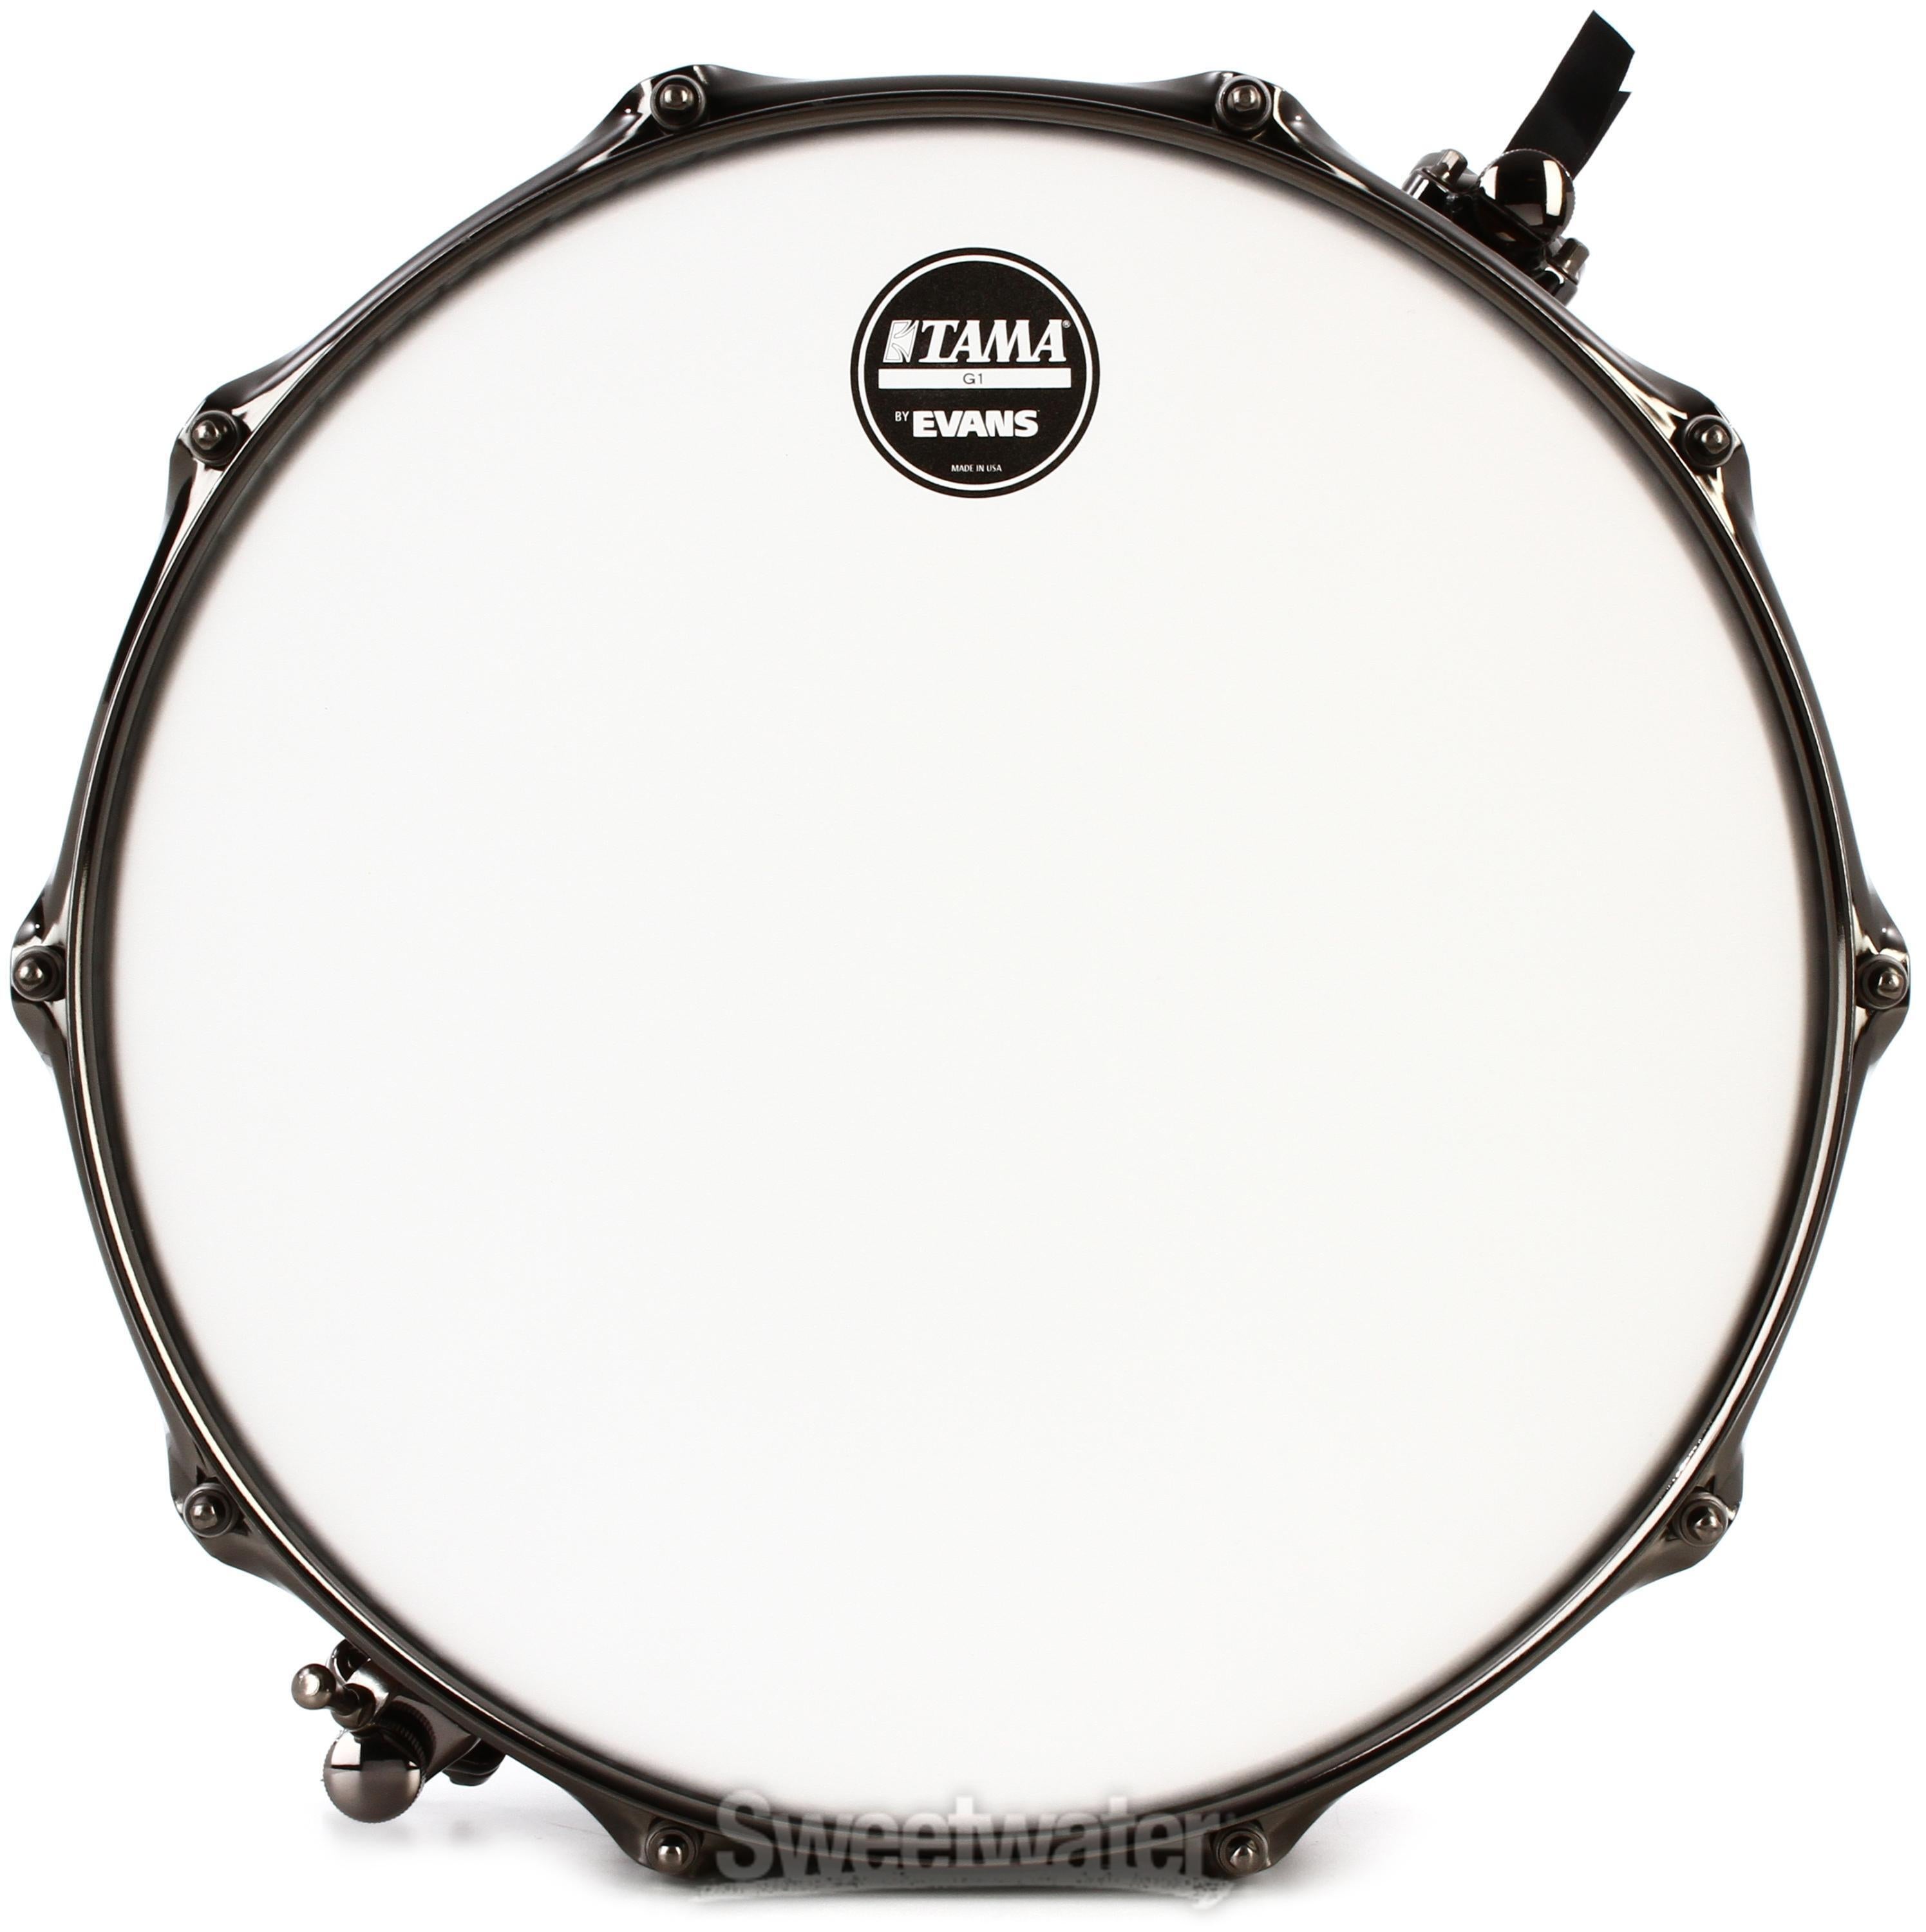 Tama S.L.P. G-Maple Snare Drum - 6 x 14 inch | Sweetwater